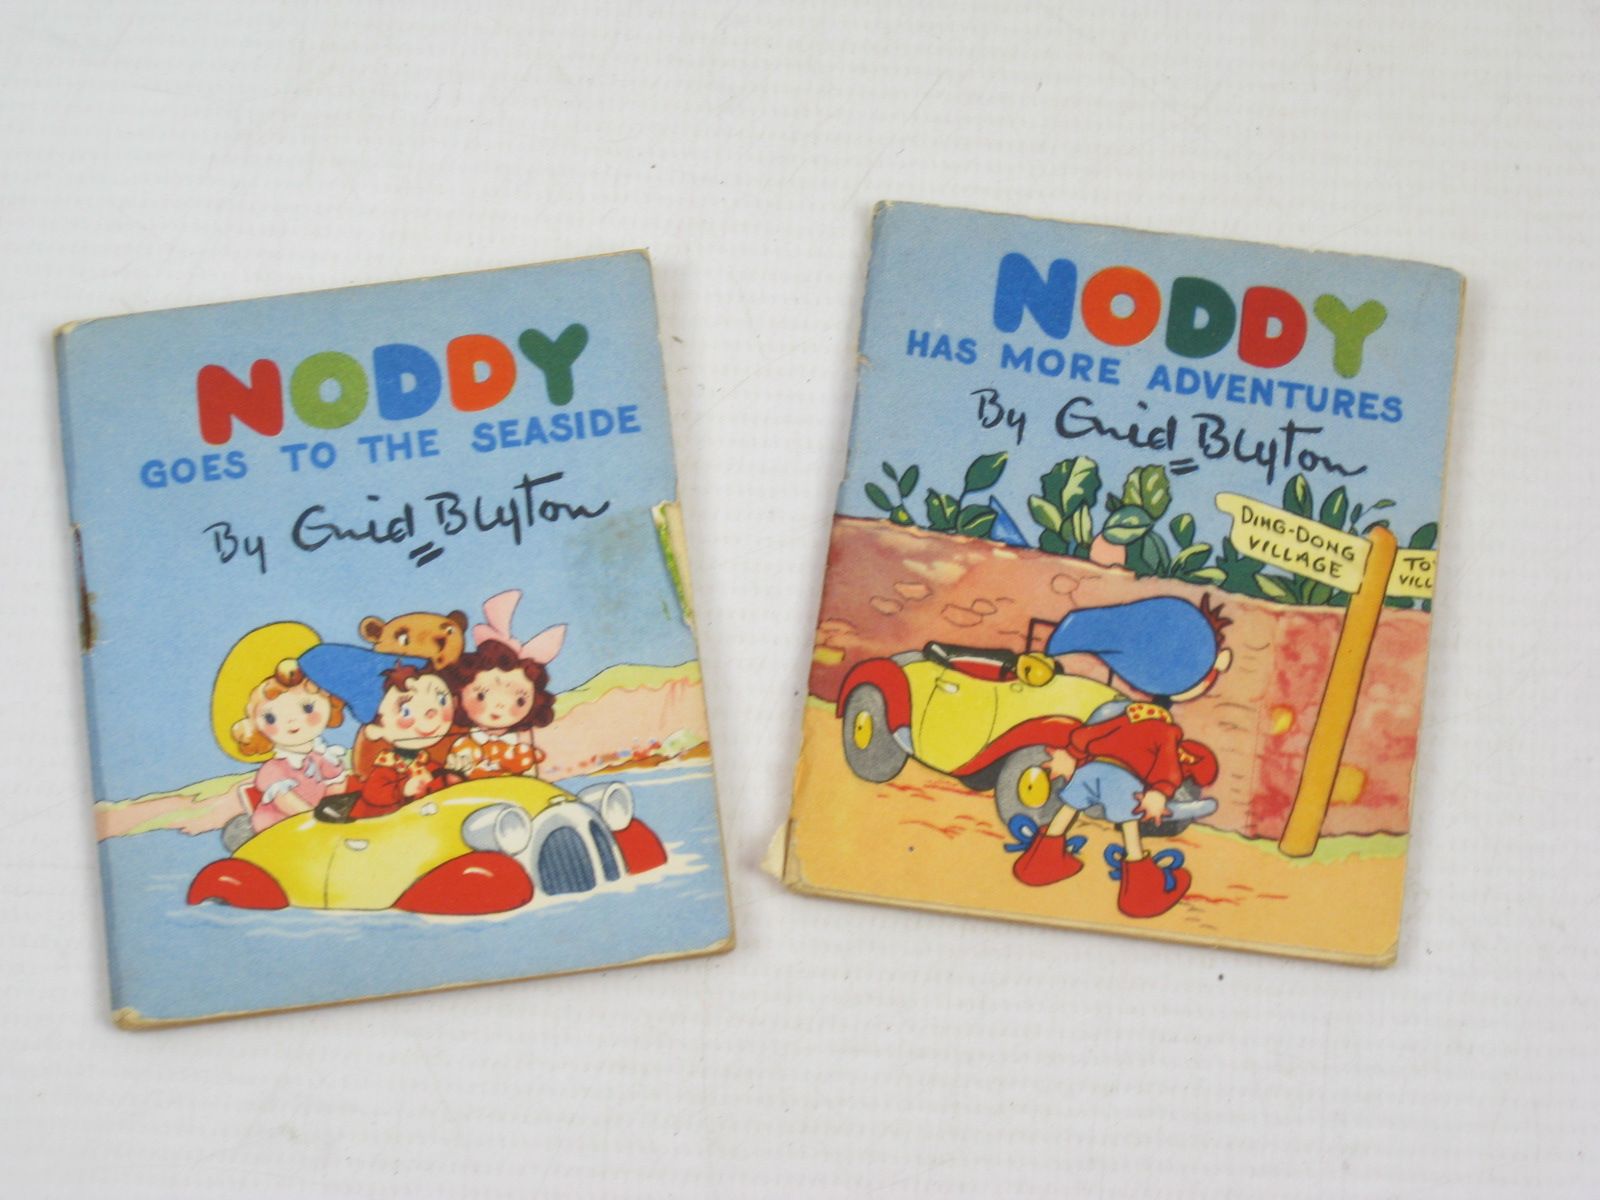 Photo of NODDY'S HOUSE OF BOOKS written by Blyton, Enid published by Sampson Low (STOCK CODE: 1314491)  for sale by Stella & Rose's Books